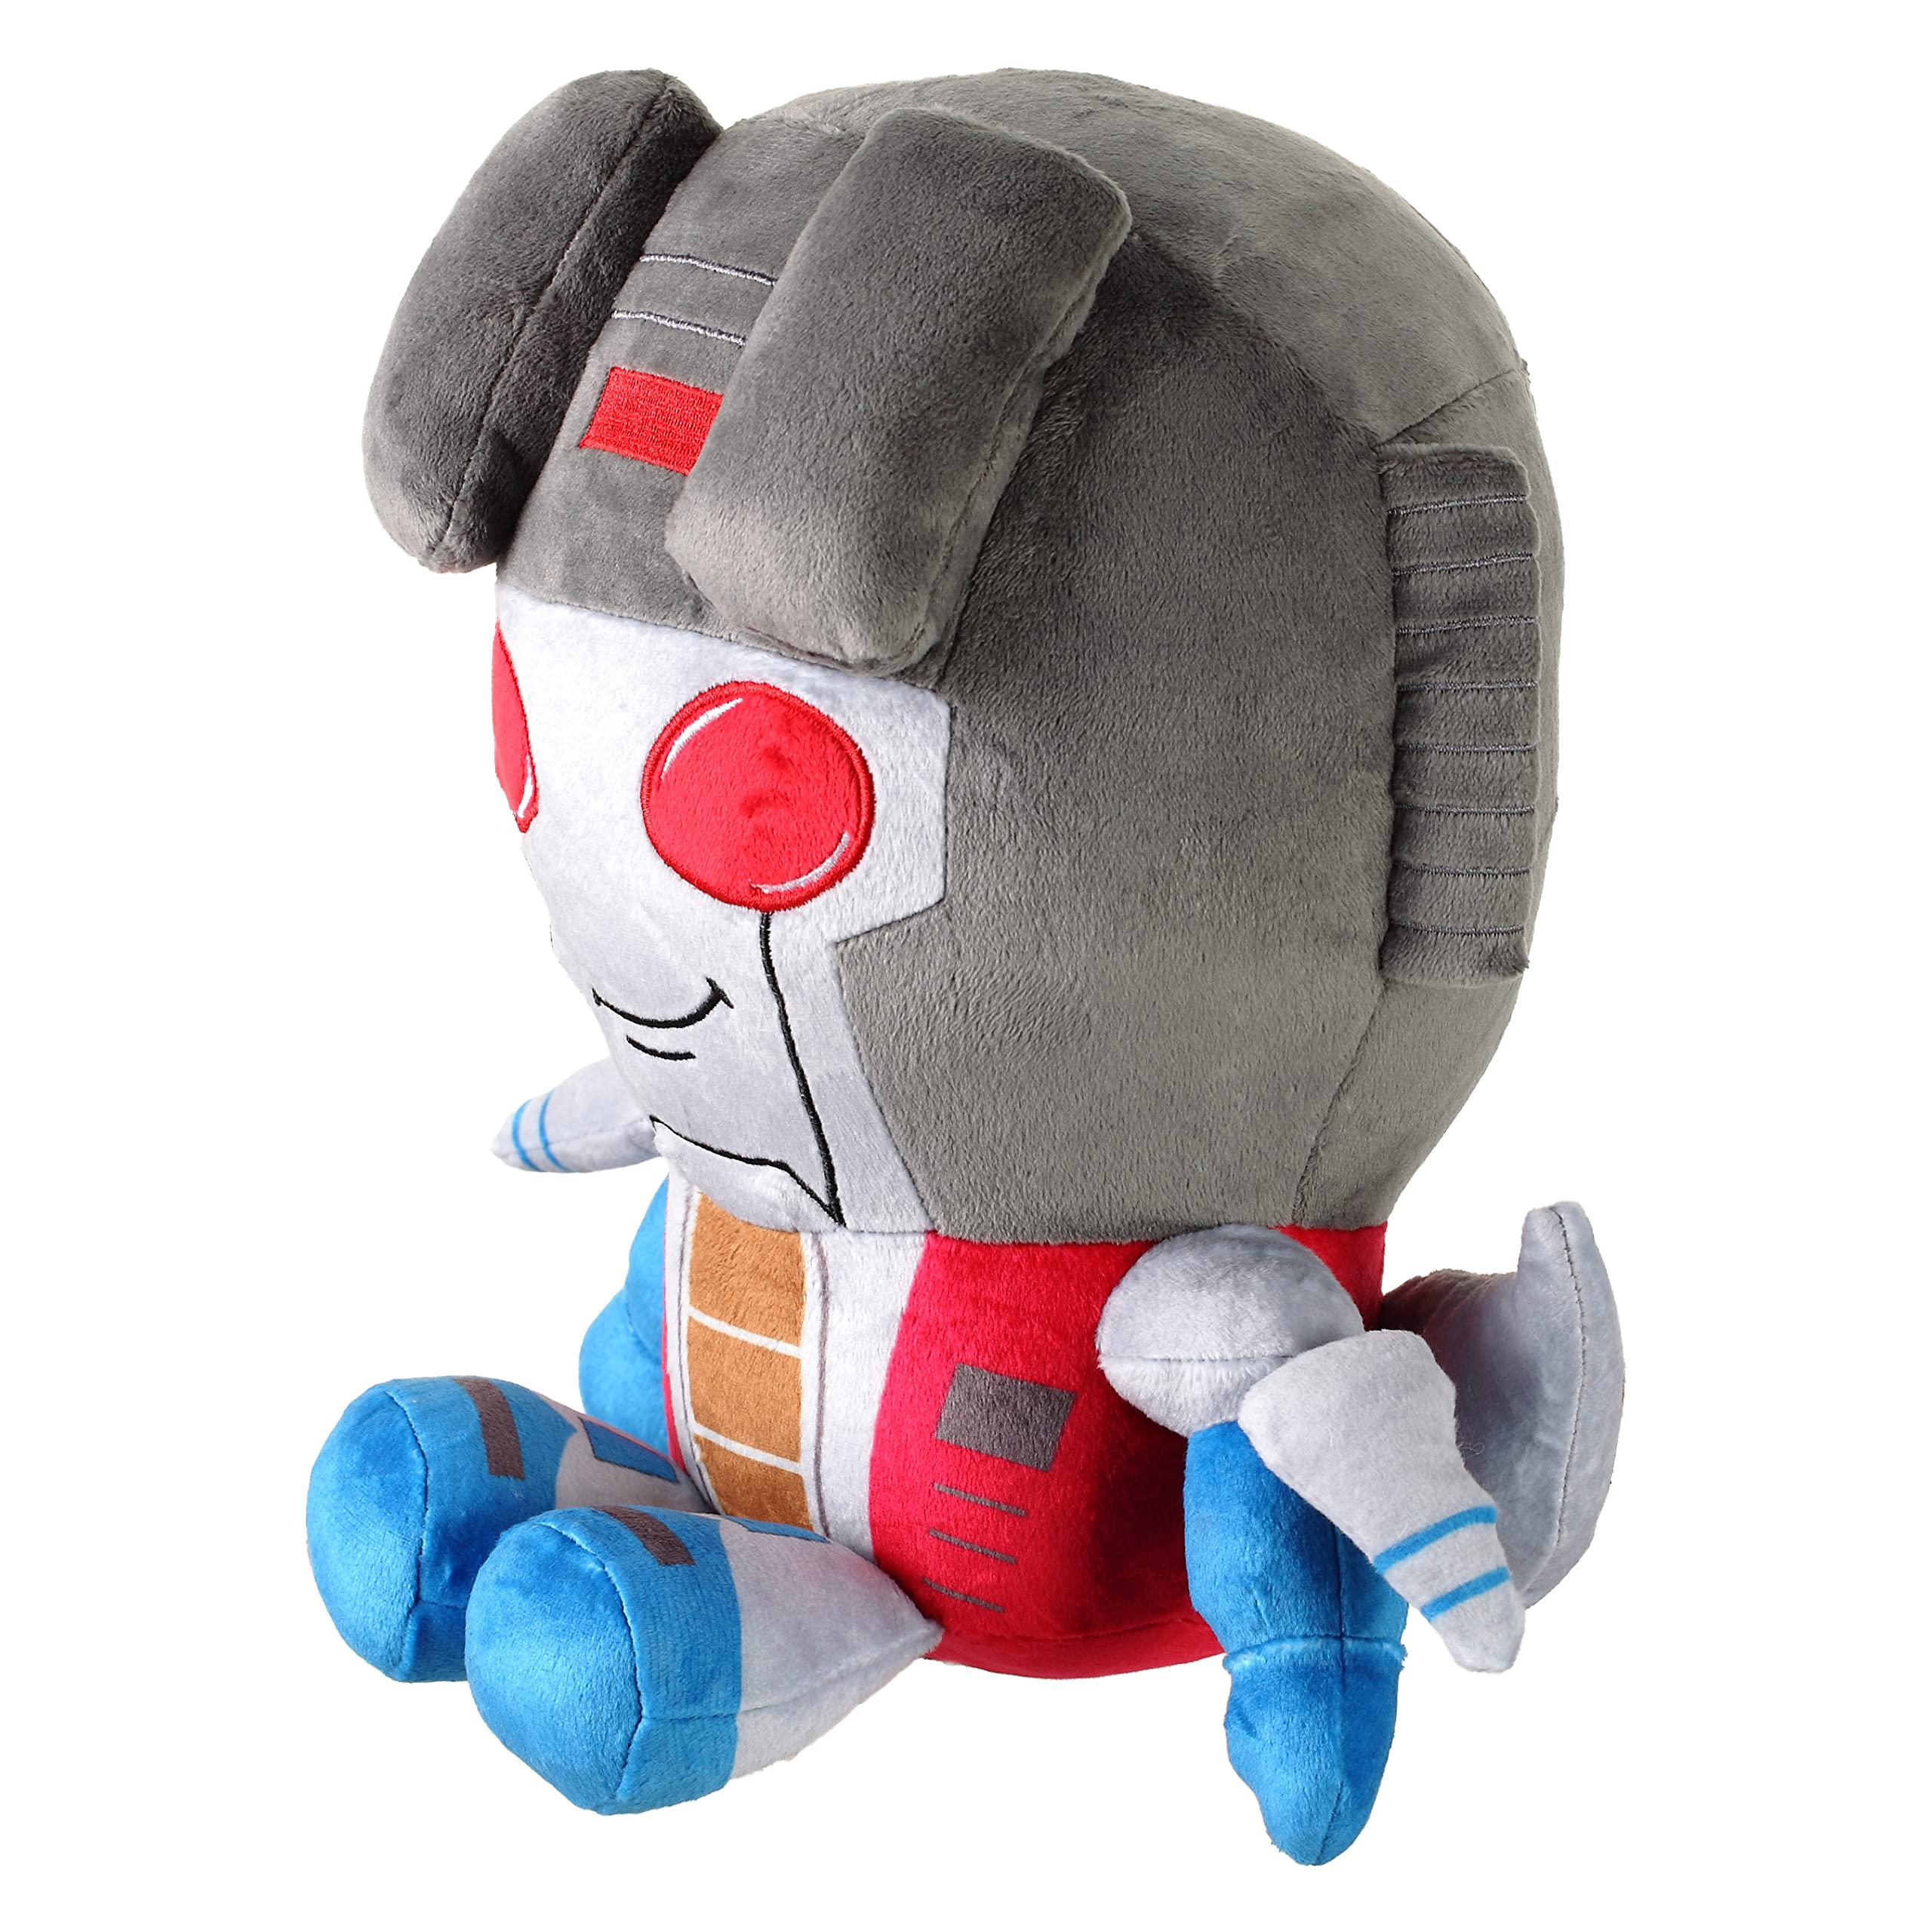 Symbiote Studios transformers | starscream plush toy | 12 inch soft minky plush fabric | officially licensed product | ages 3+